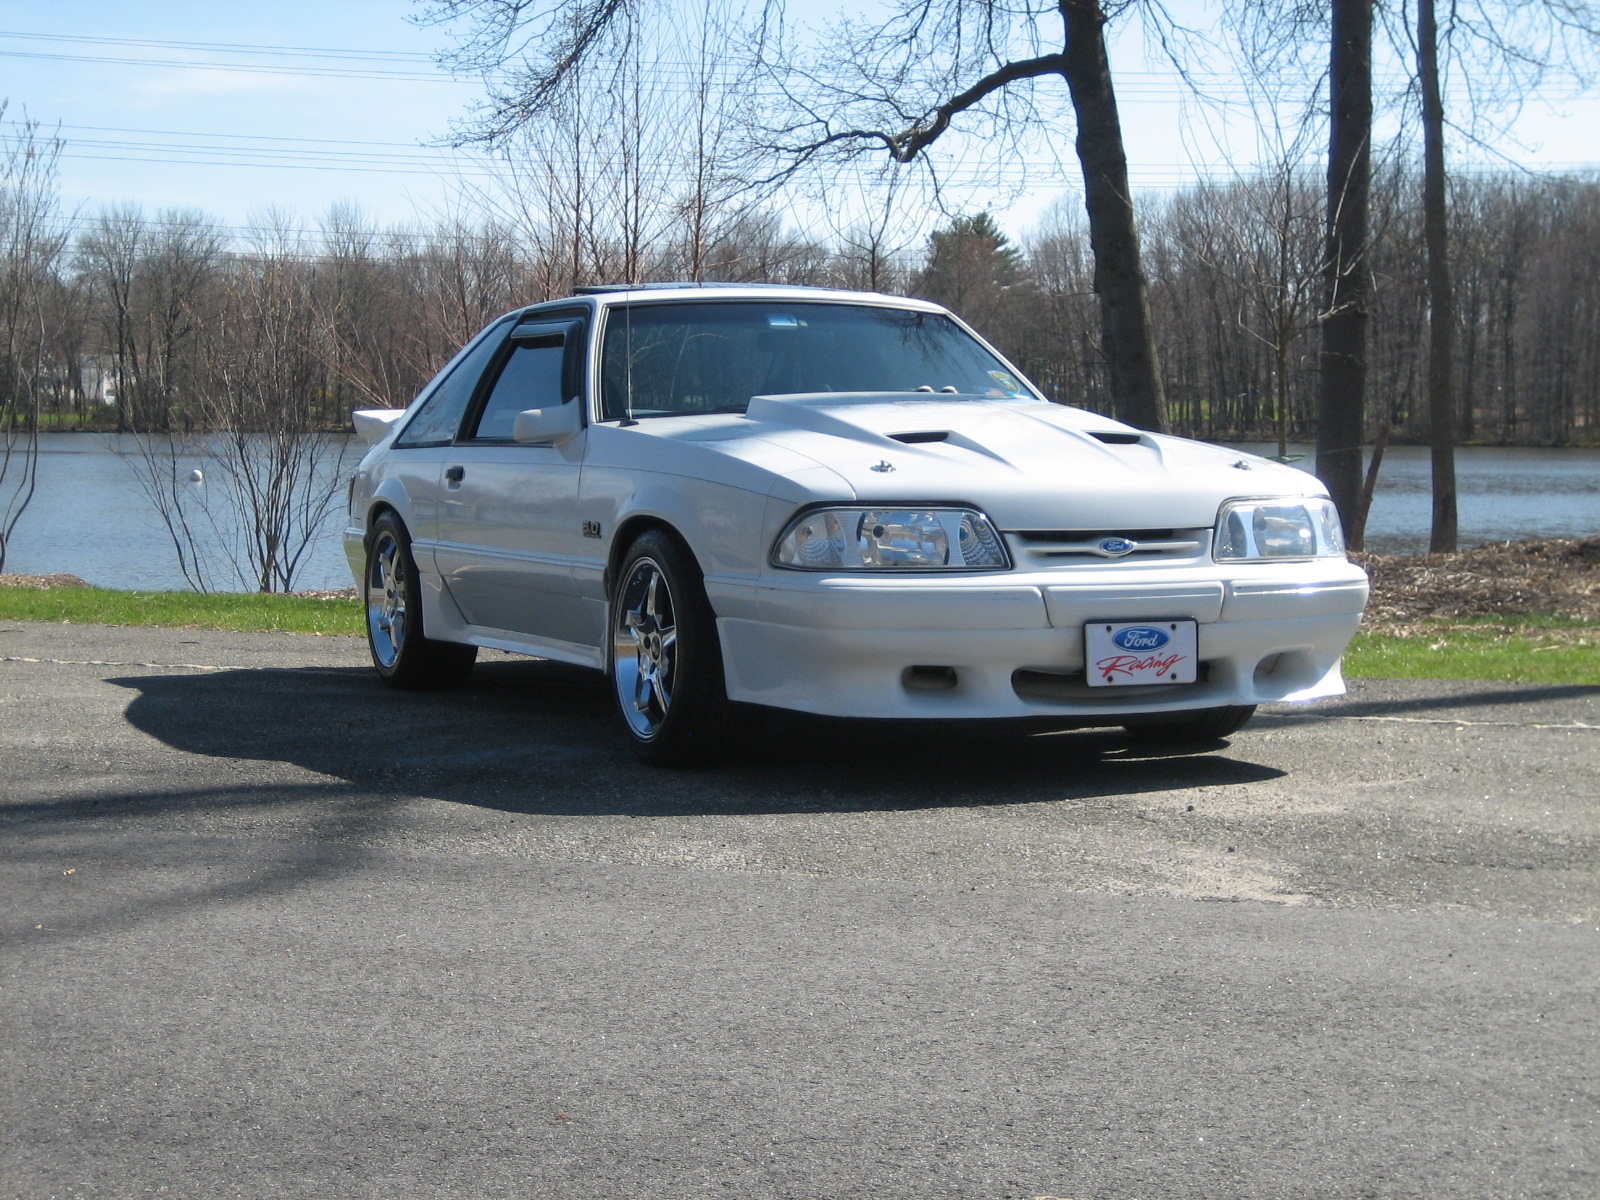 1990 Ford mustang lx 5.0 specs #1